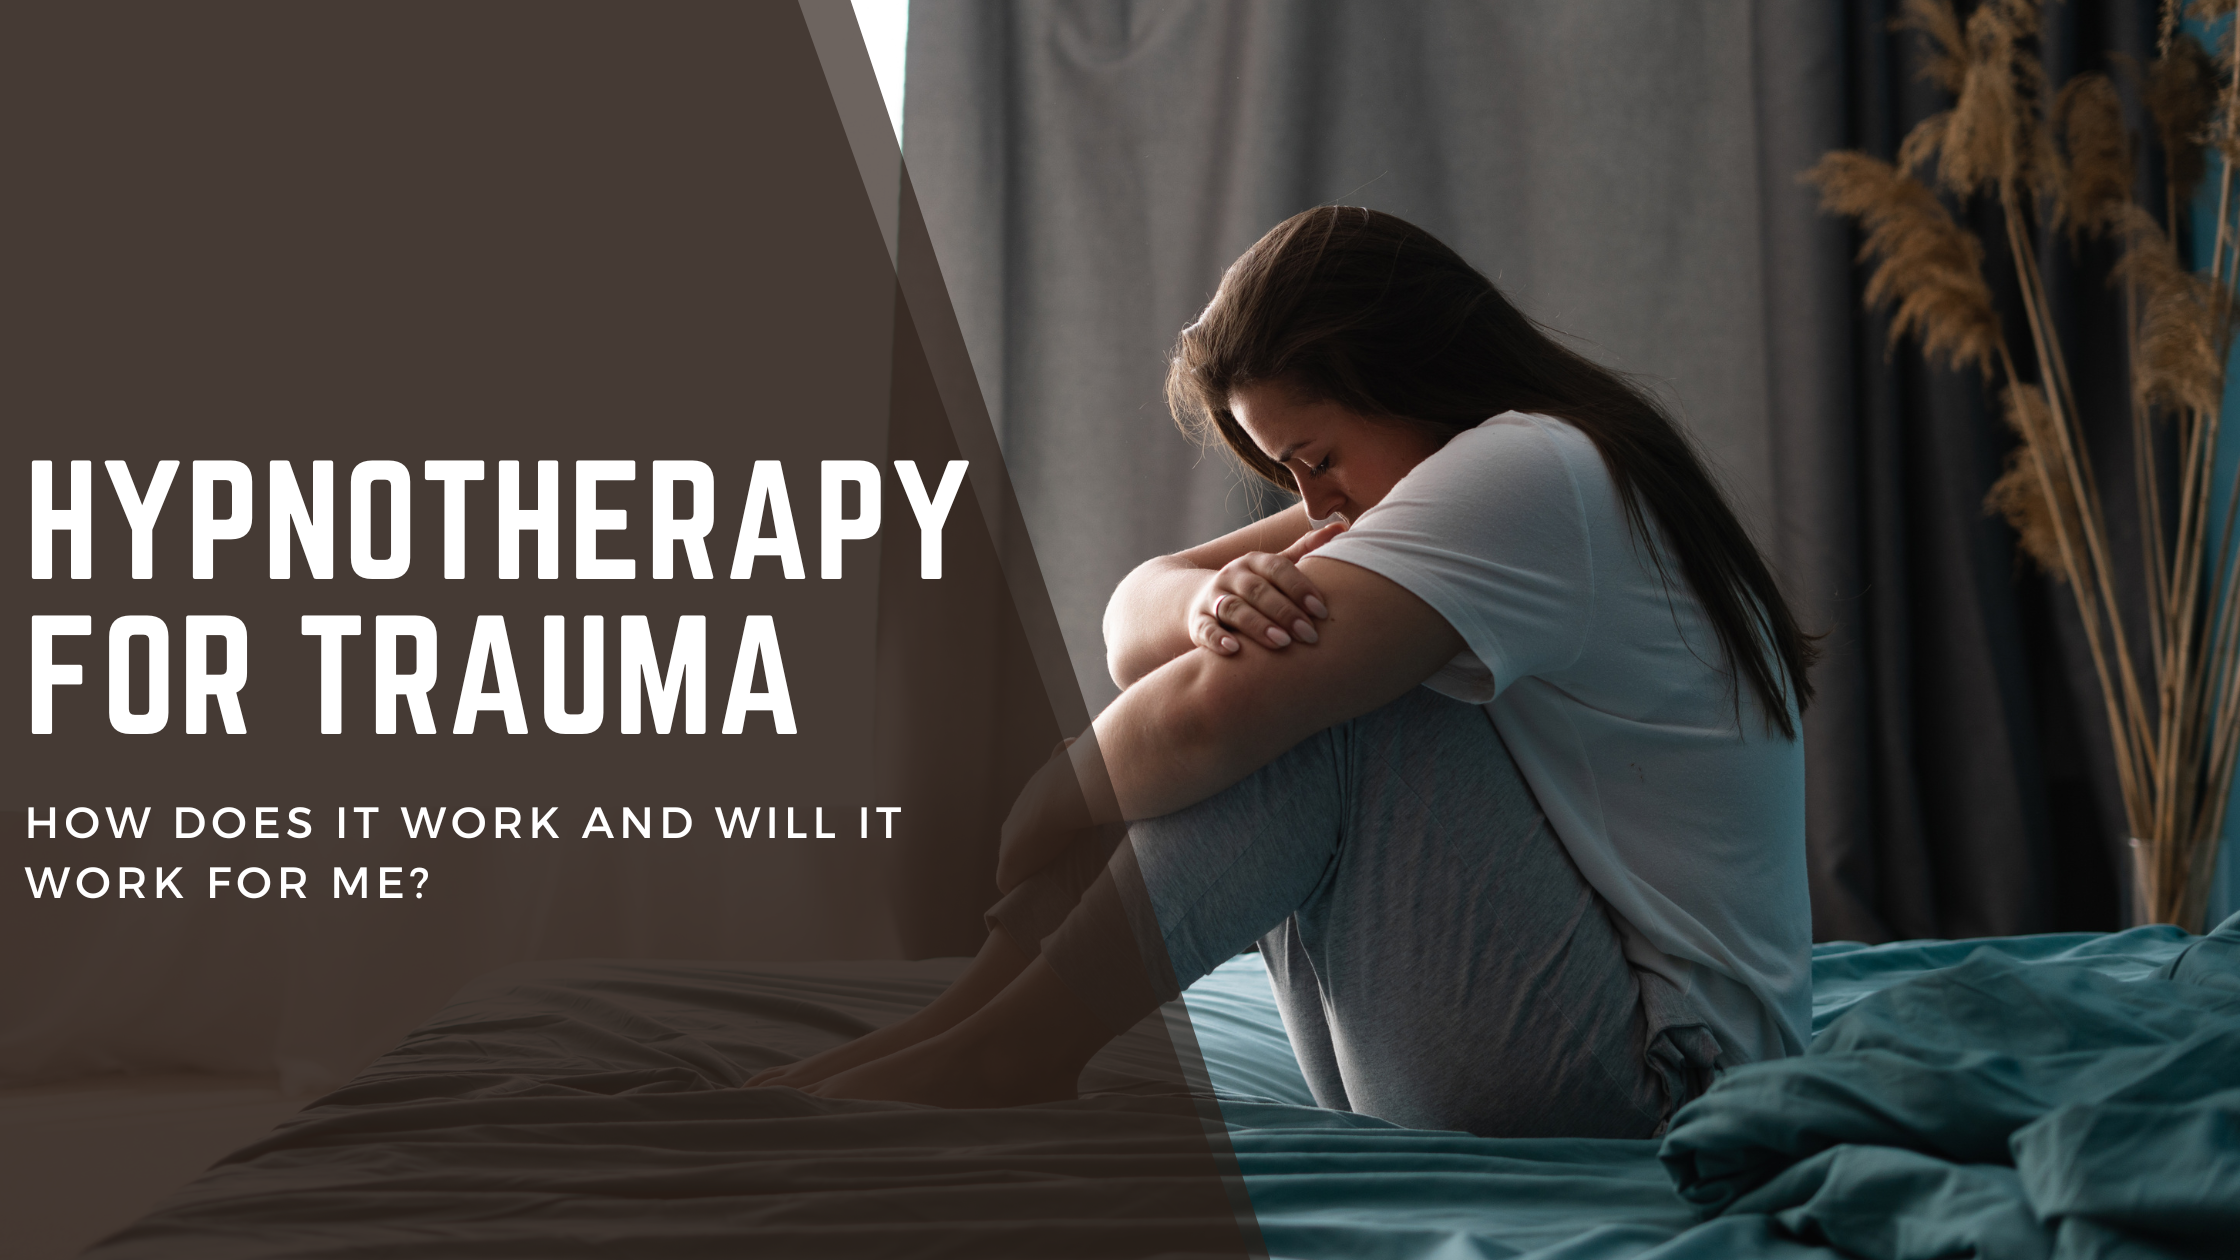 Hypnotherapy For Trauma: How Does It Work And Will It Work For Me?